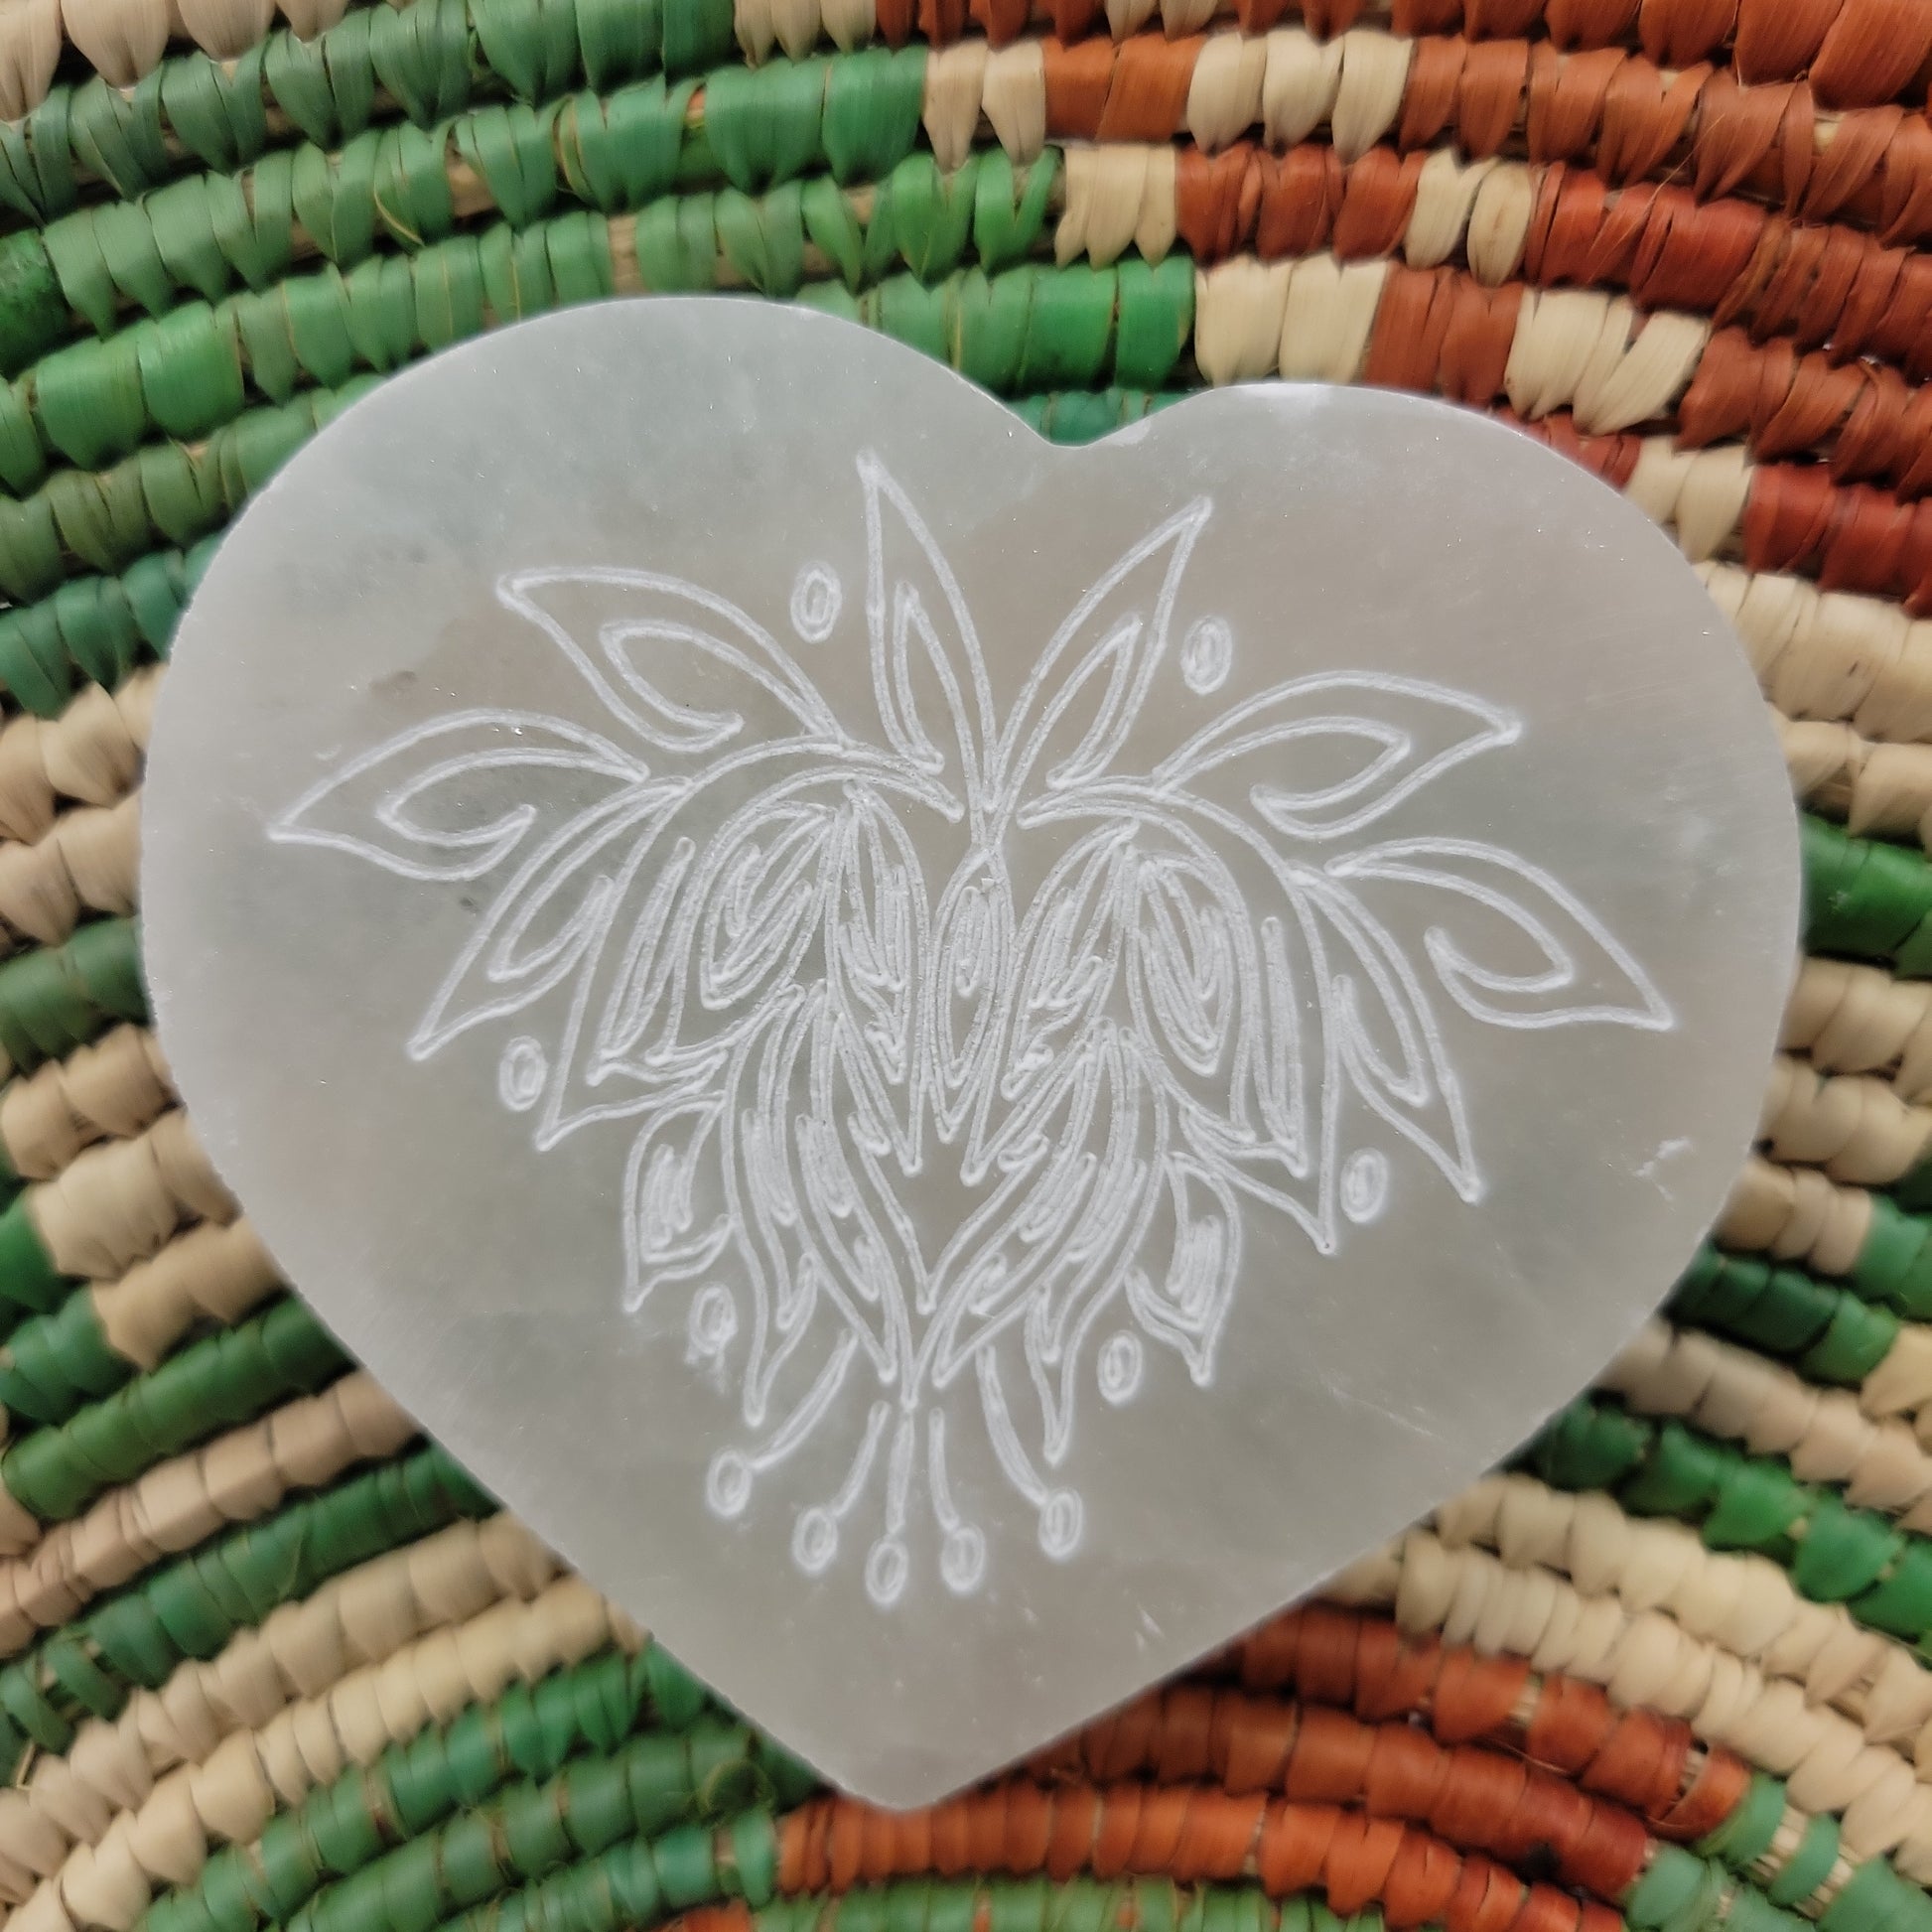 Selenite lotus heart available at wholesale and retail prices, only at our crystal shop in San Diego!